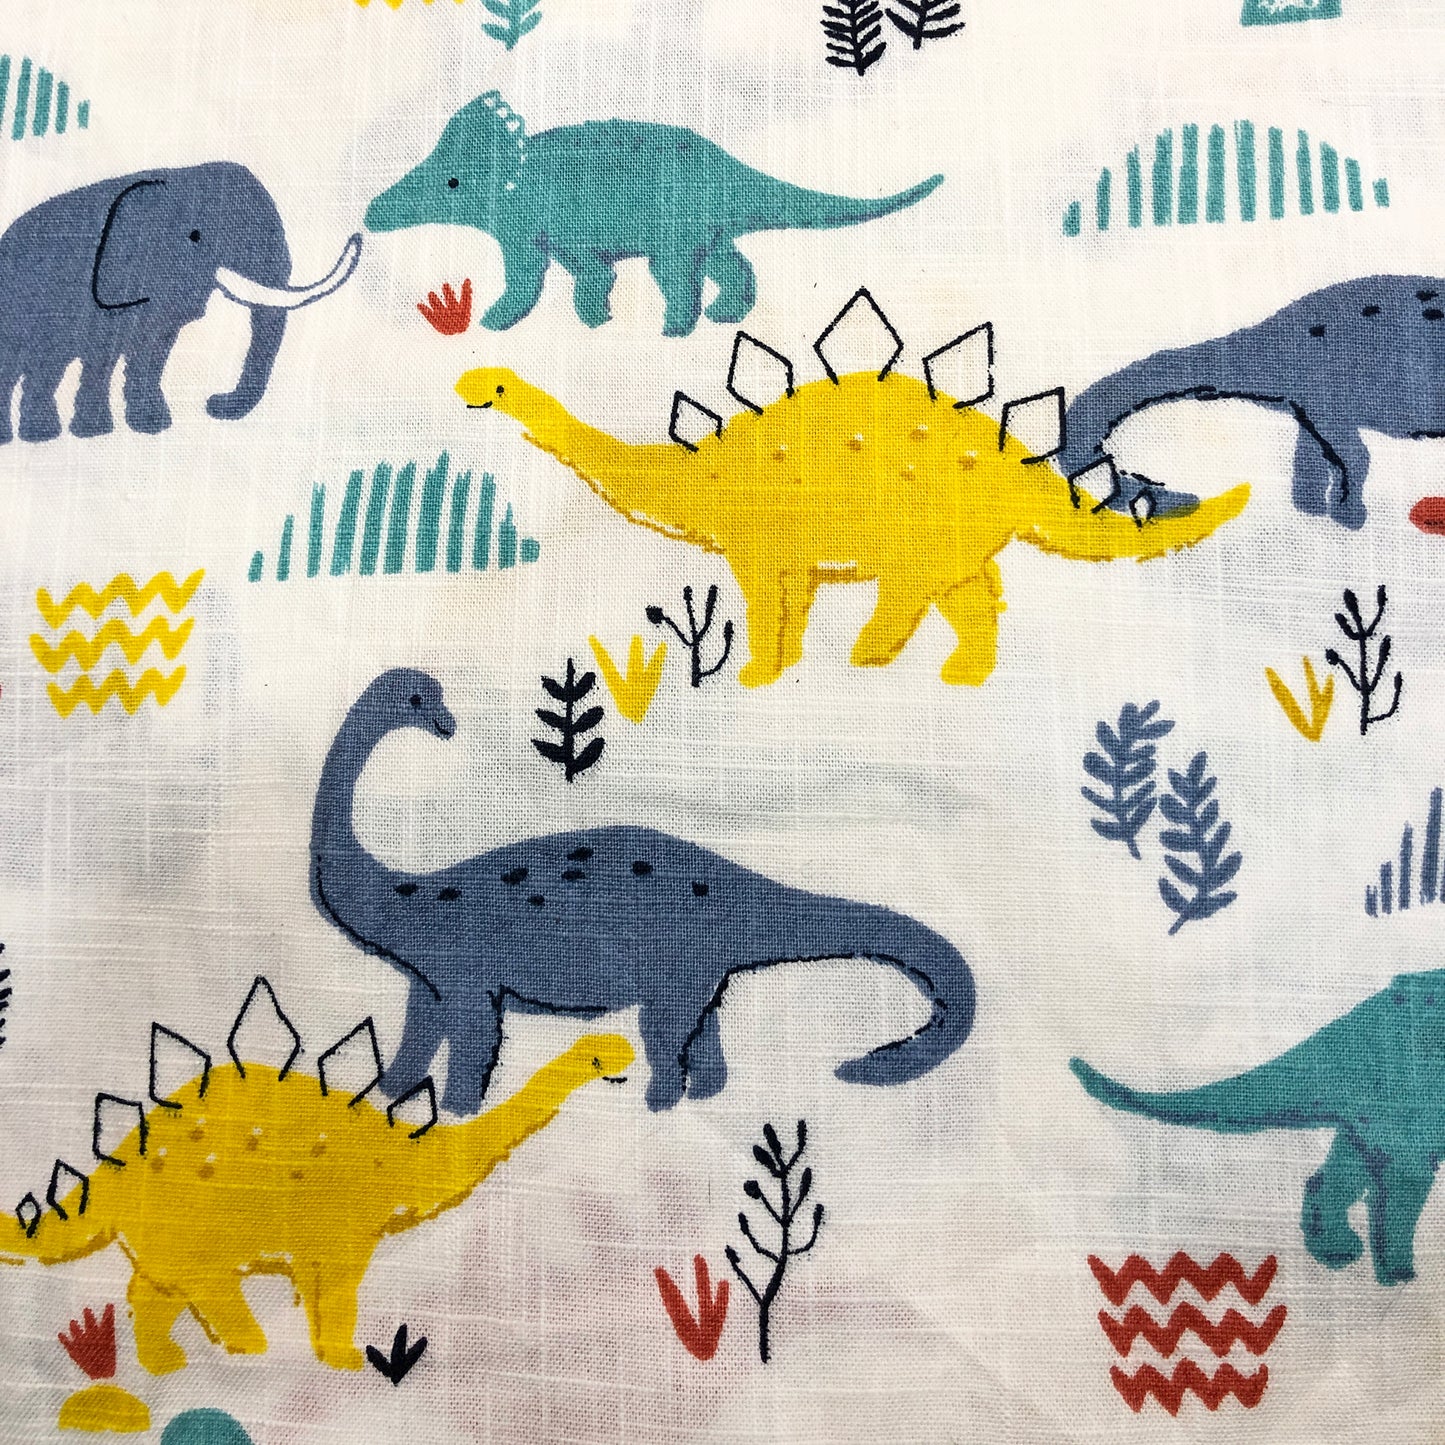 dino-printed-cotton-fabric-online-for-baby-nightsuits-india